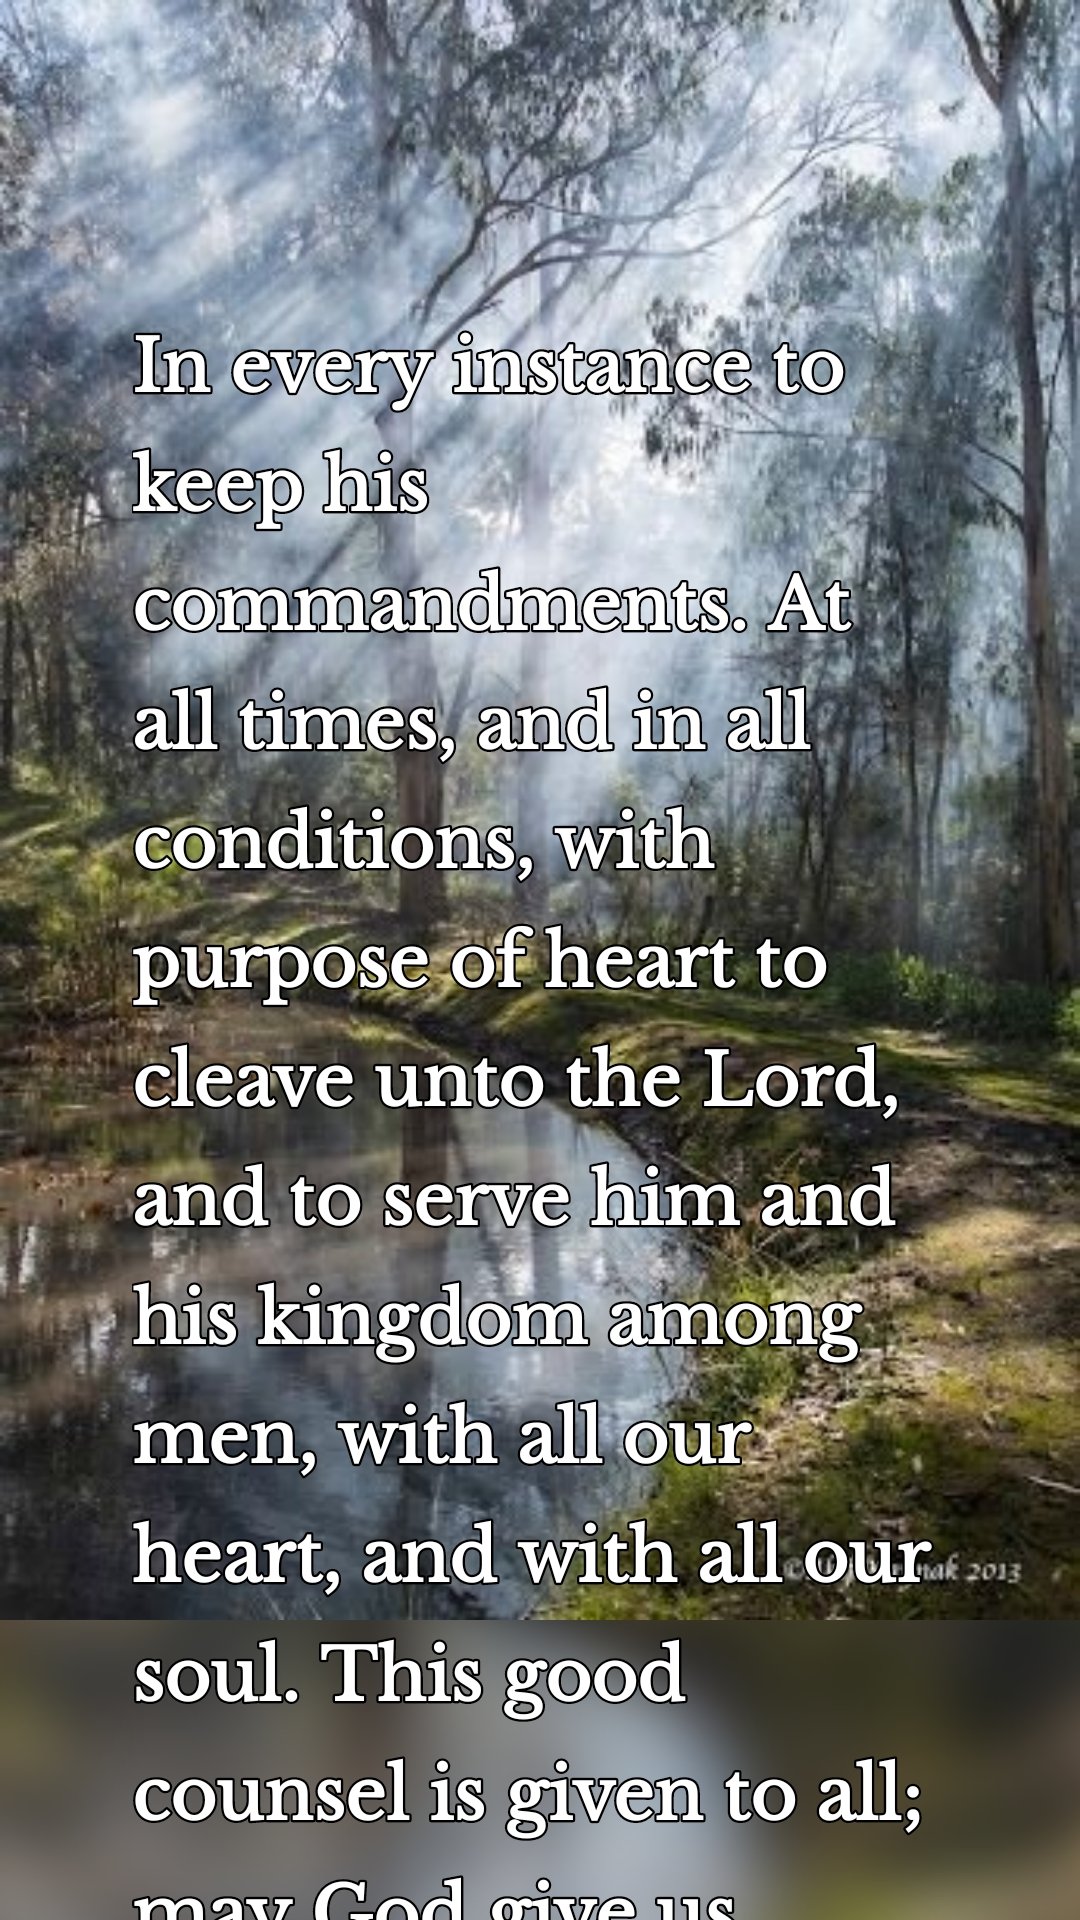 In every instance to keep his commandments. At all times, and in all conditions, with purpose of heart to cleave unto the Lord, and to serve him and his kingdom among men, with all our heart, and with all our soul. This good counsel is given to all; may God give us grace to take it